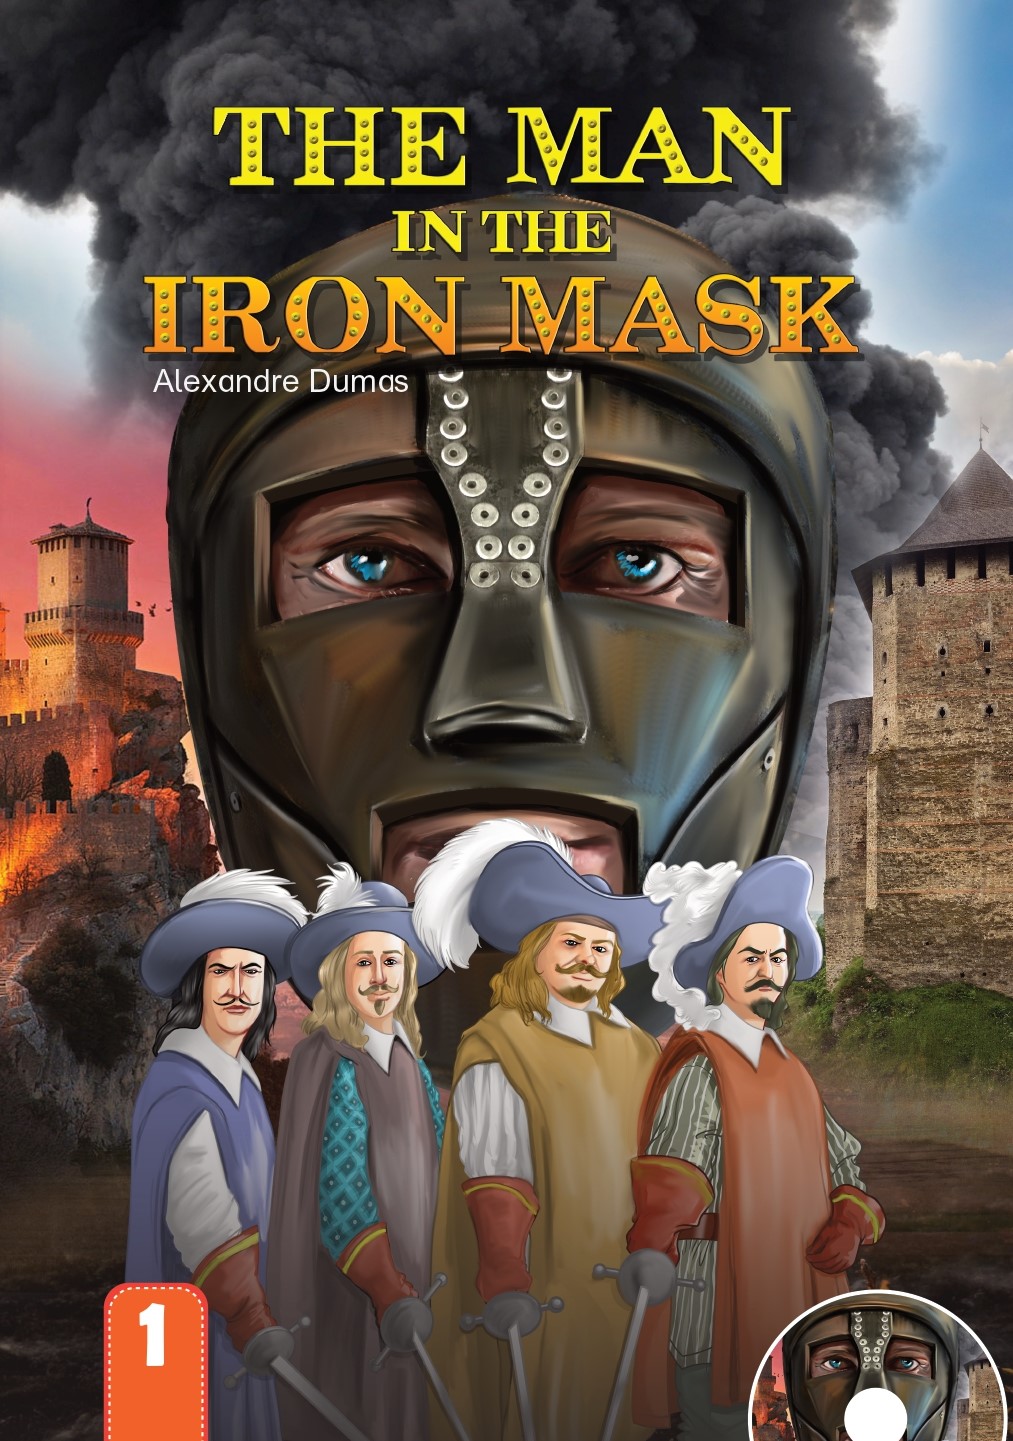 THE MAN IN THE IRON MASK 